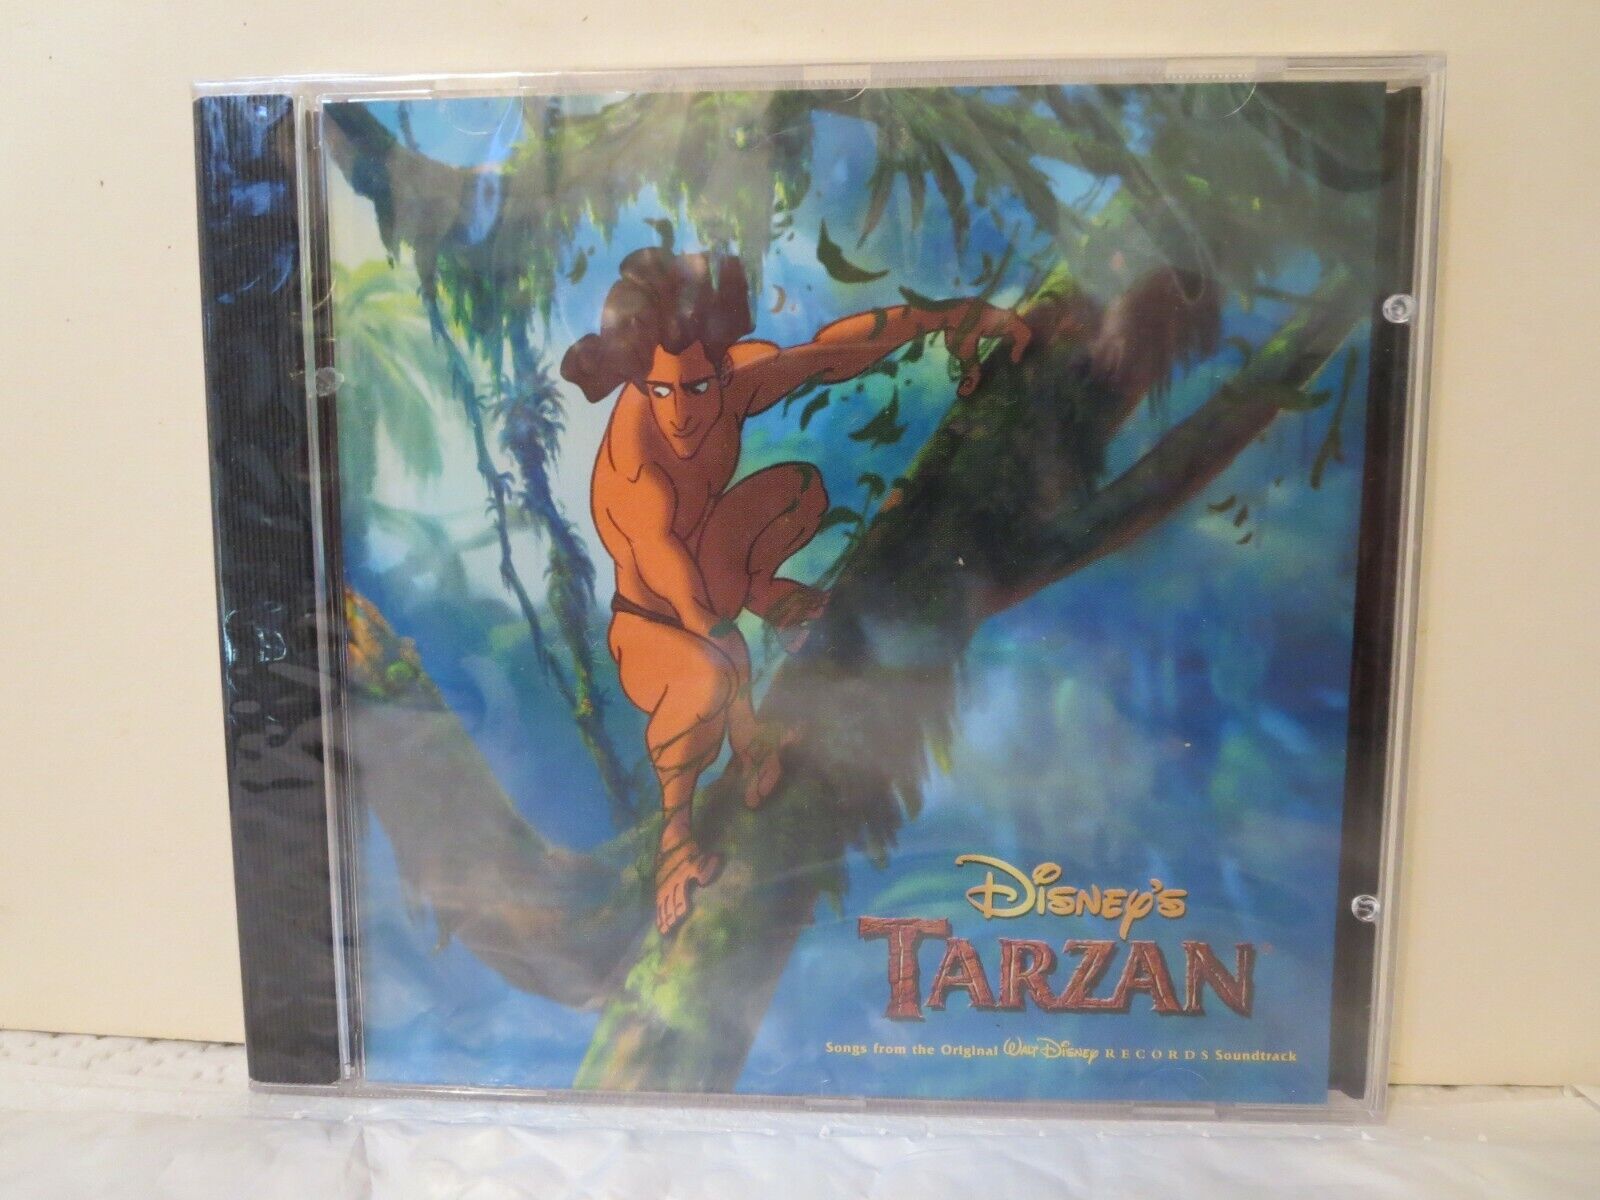 TARZAN (SEALED and RARE Walt Disney Promotional CD) Phil Collins, 2 Songs, HEART